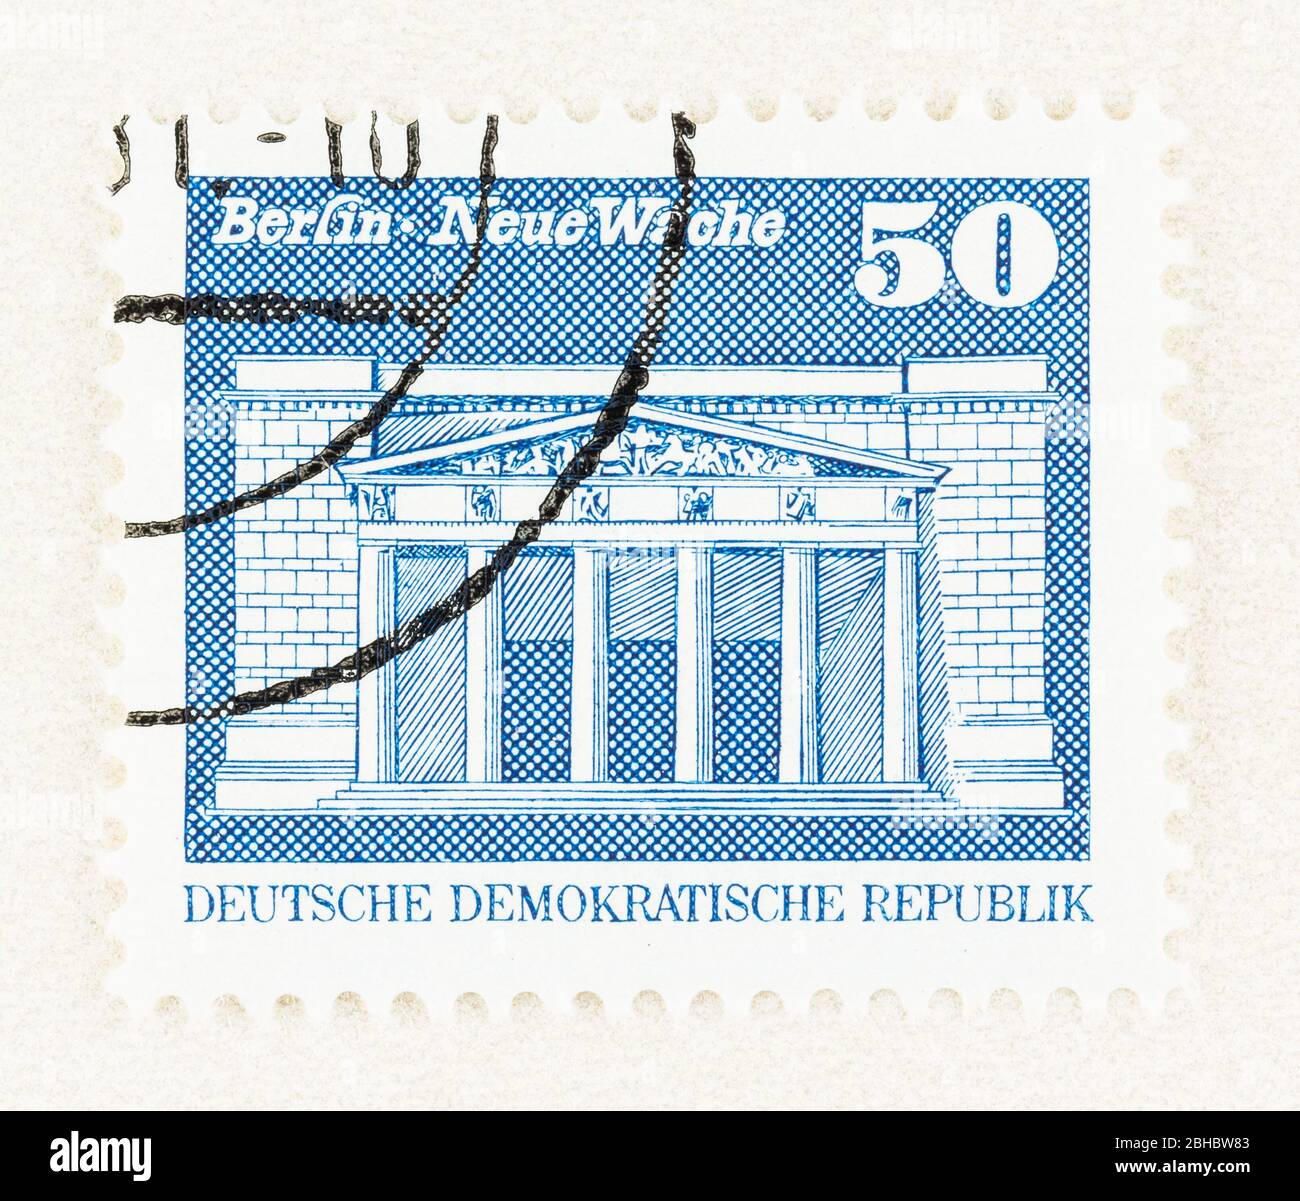 SEATTLE WASHINGTON - April 23, 2020: Small format stamp featuring the New Guardhouse in Berlin, commemorating construction in DDR. Stock Photo